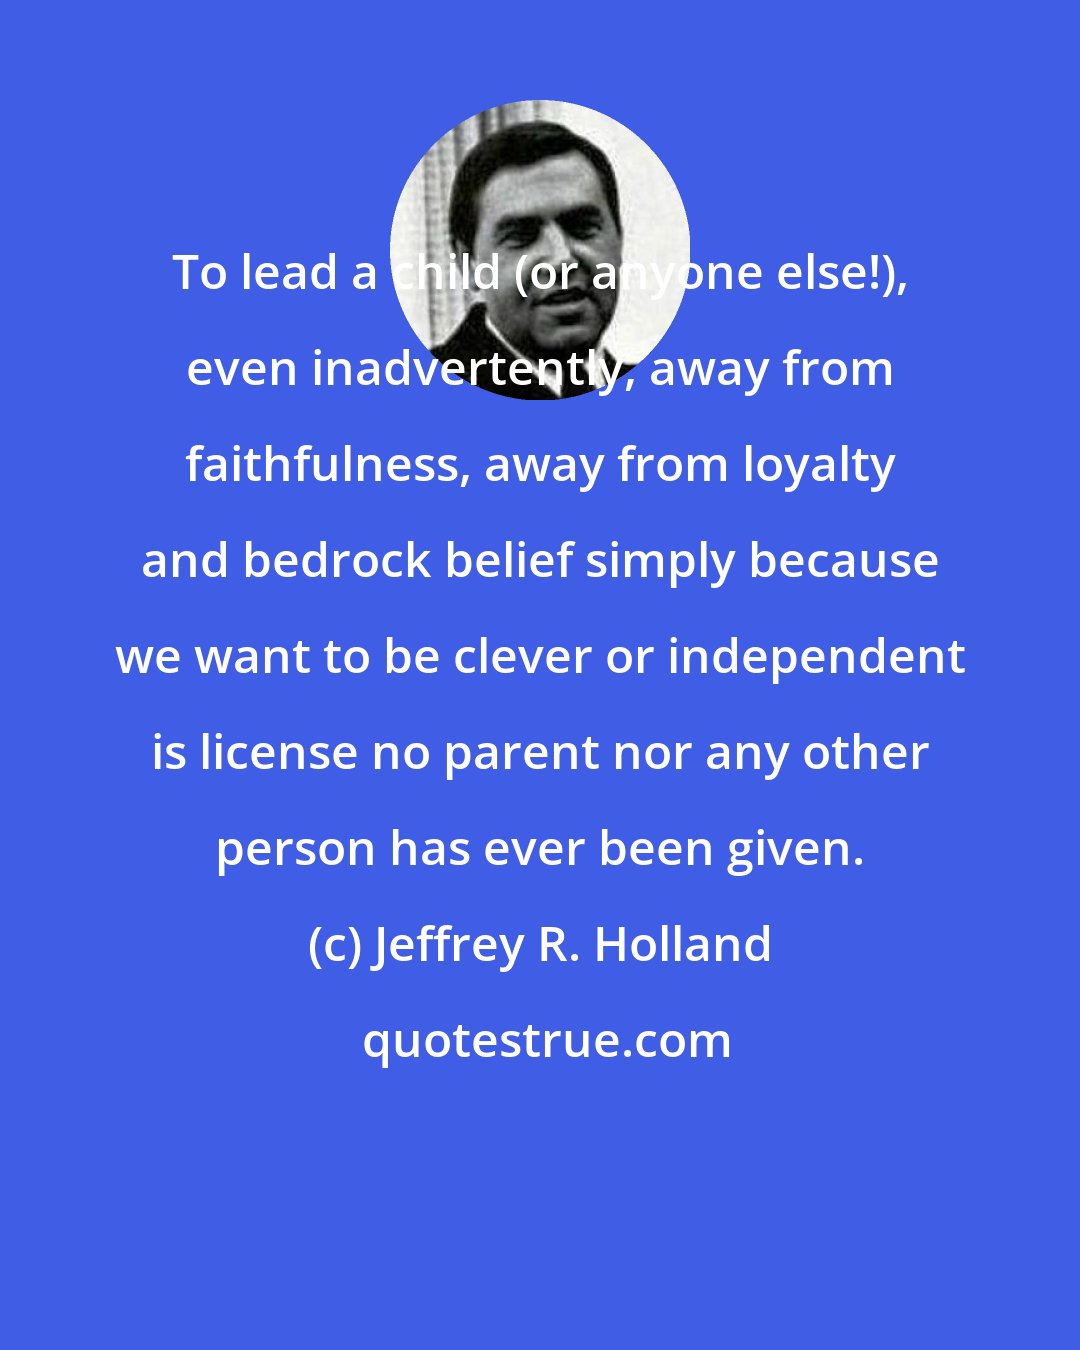 Jeffrey R. Holland: To lead a child (or anyone else!), even inadvertently, away from faithfulness, away from loyalty and bedrock belief simply because we want to be clever or independent is license no parent nor any other person has ever been given.